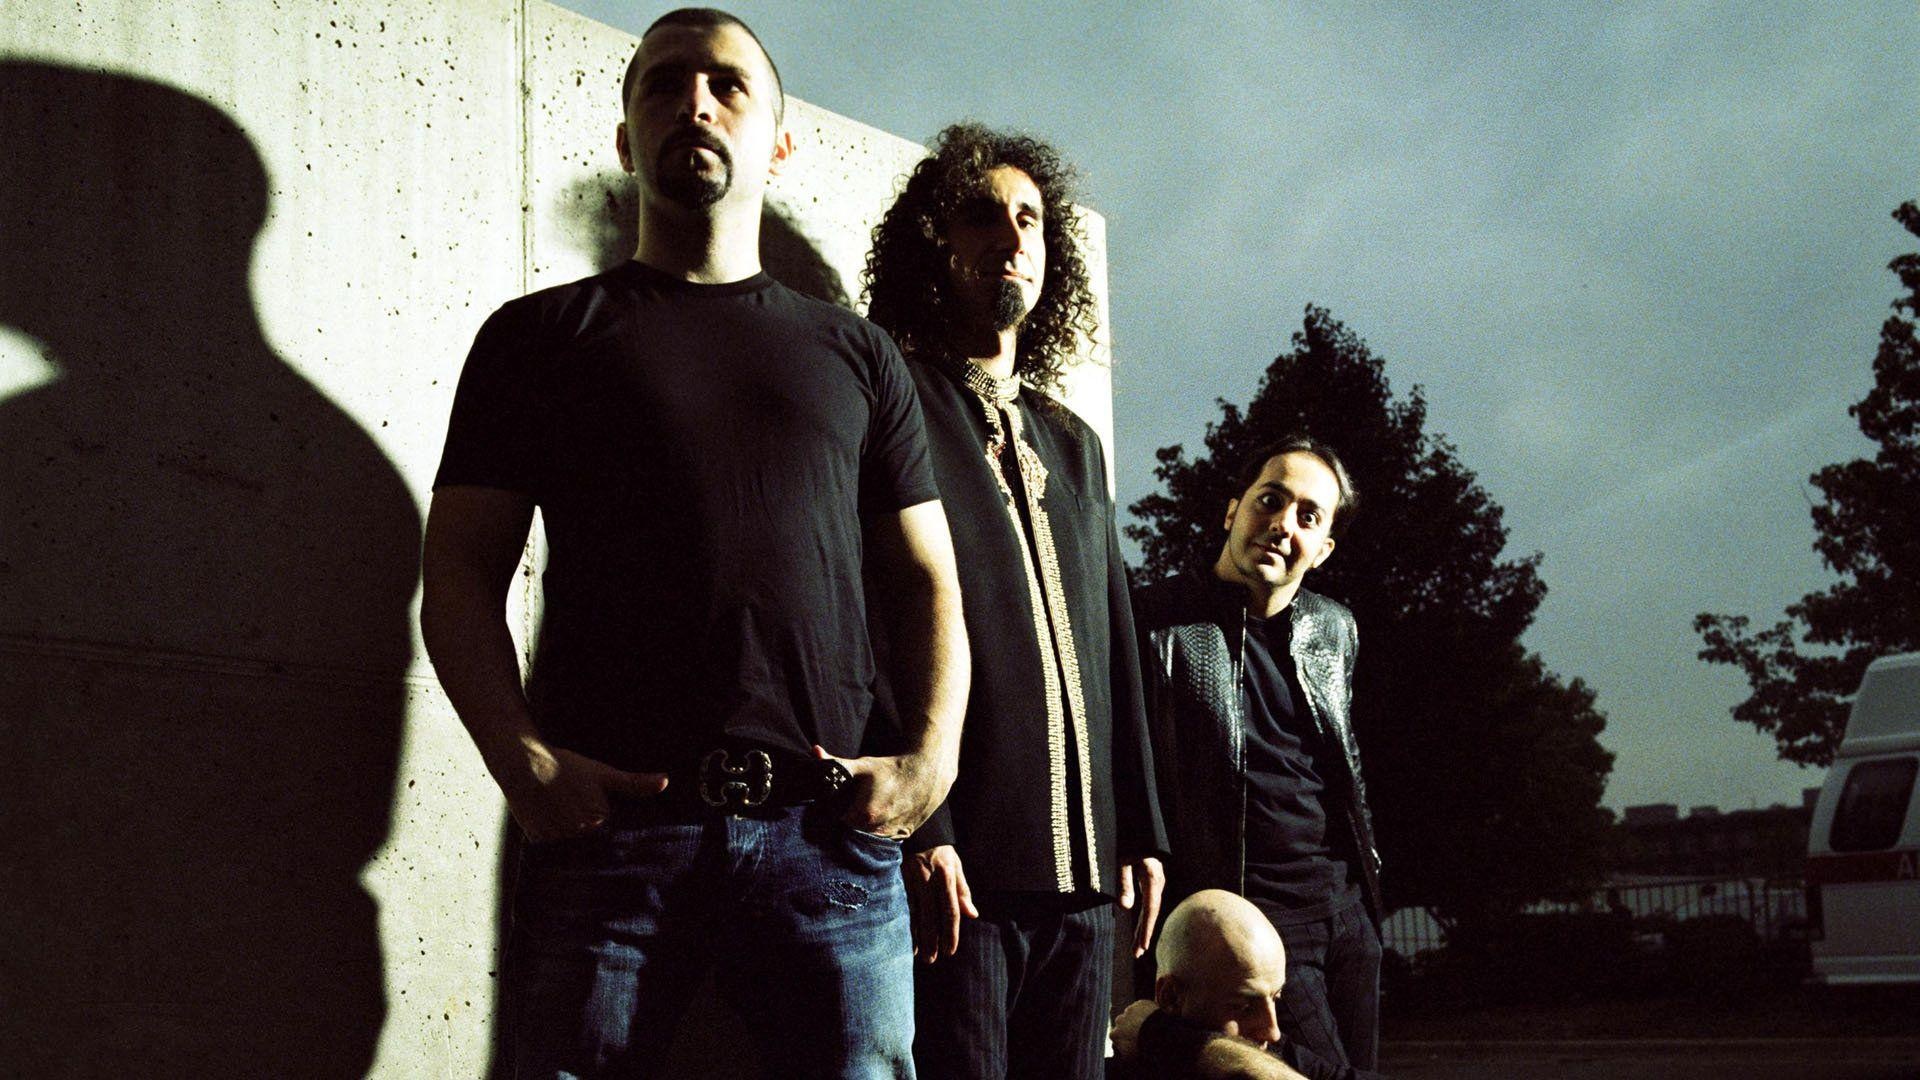 System of a Down: A single epic album released in two parts: Mezmerize/Hypnotize, 2004. 1920x1080 Full HD Wallpaper.